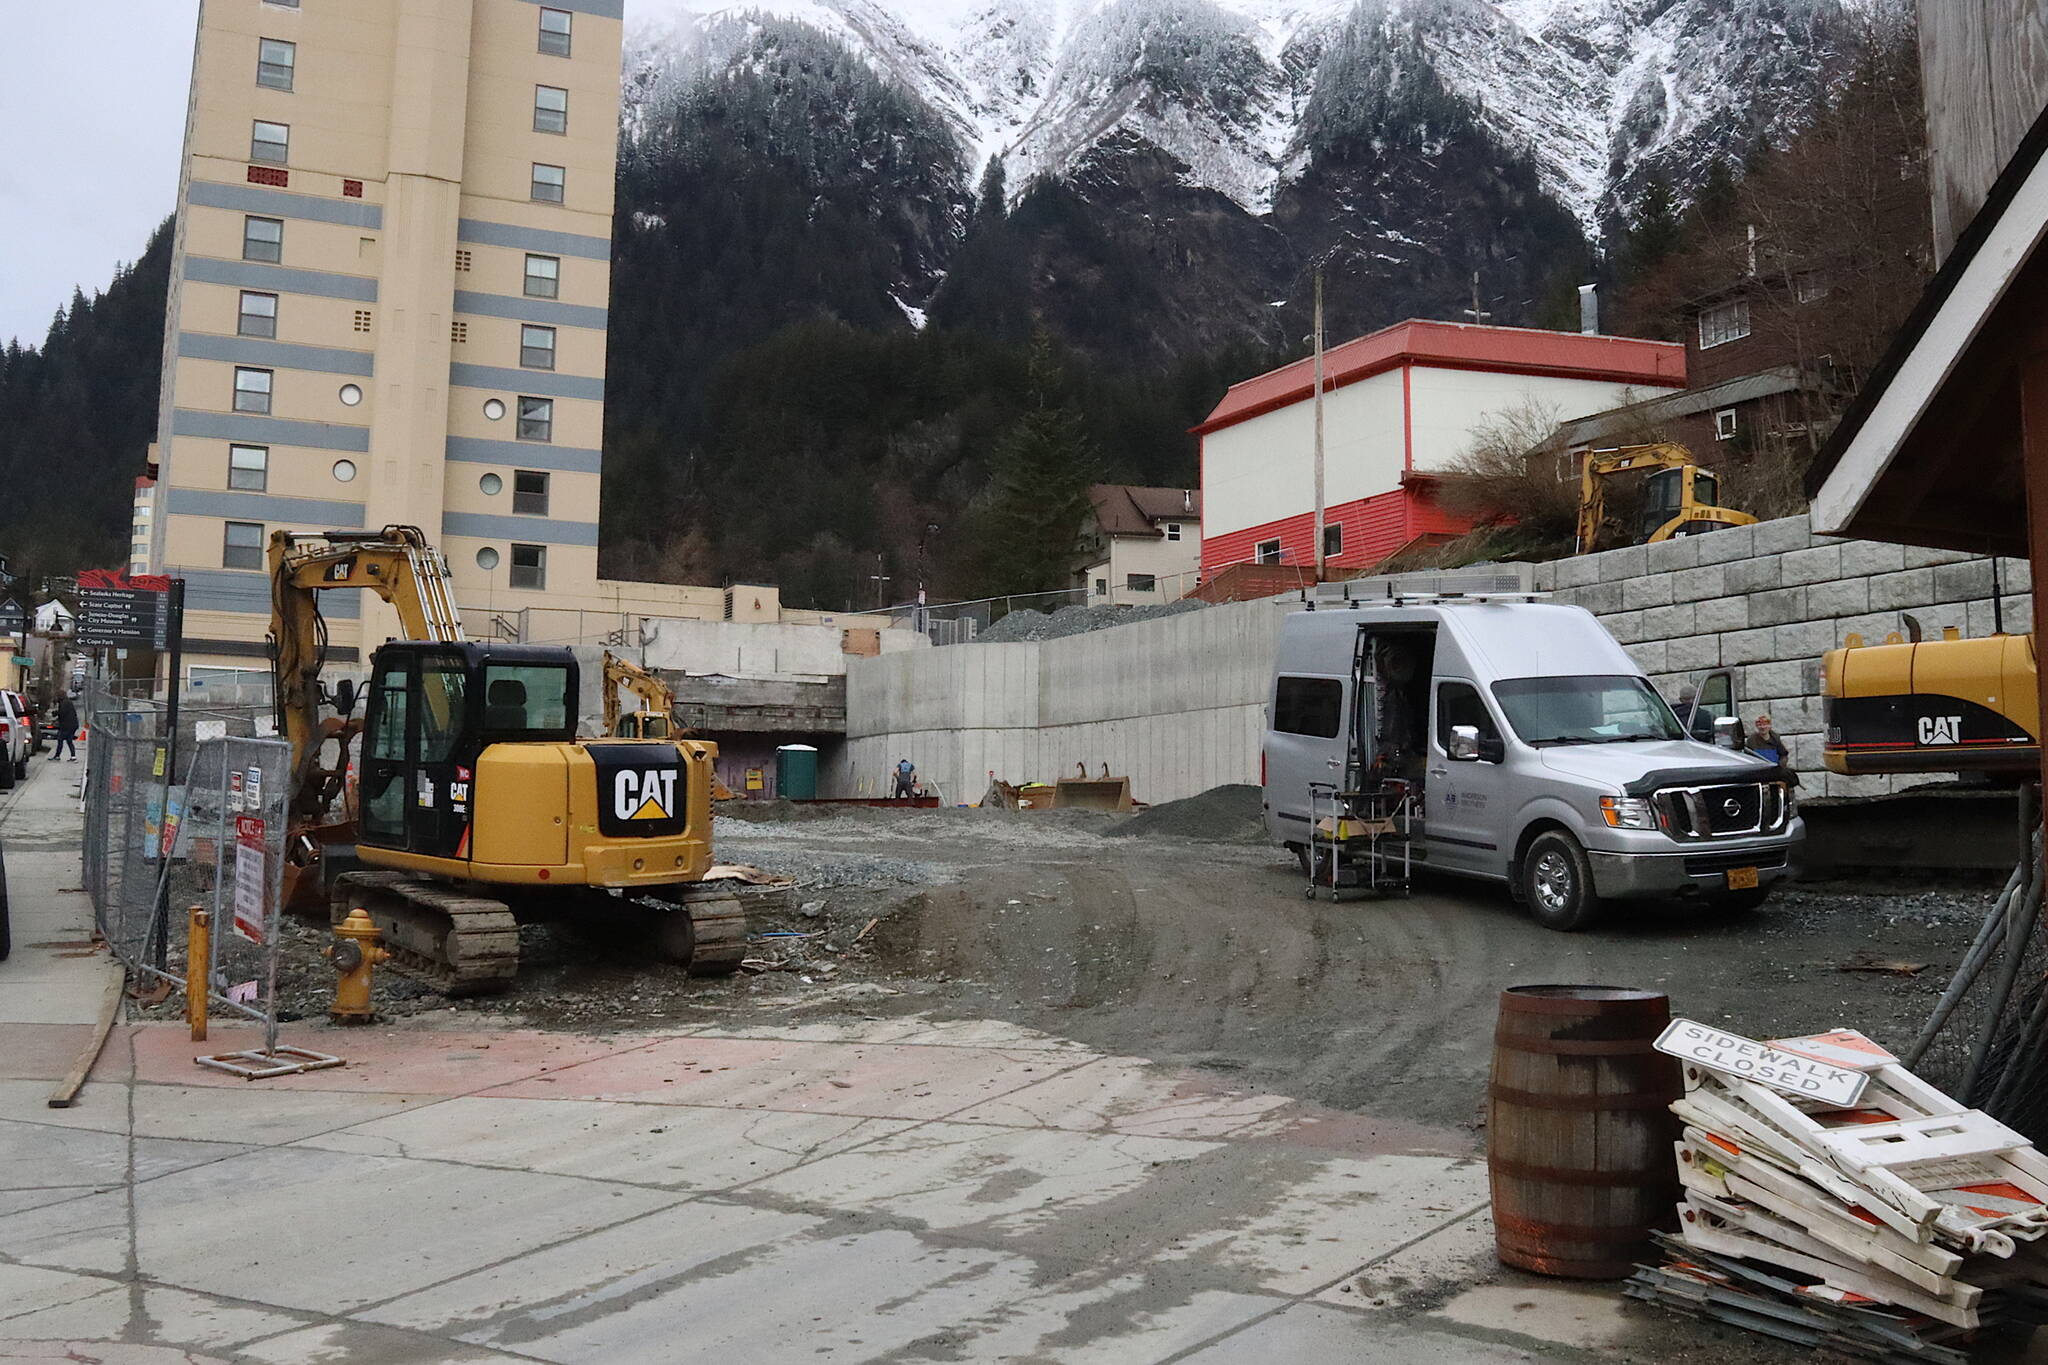 Construction workers work on retaining walls and other infrastructure Tuesday in preparation for an expanded three-season food court on South Franklin Street. The Juneau Planning Commission unanimously approved a conditional use permit for the project, some of which occupies the space where the historic Elks Lodge stood until it was demolished last year. (Mark Sabbatini / Juneau Empire)